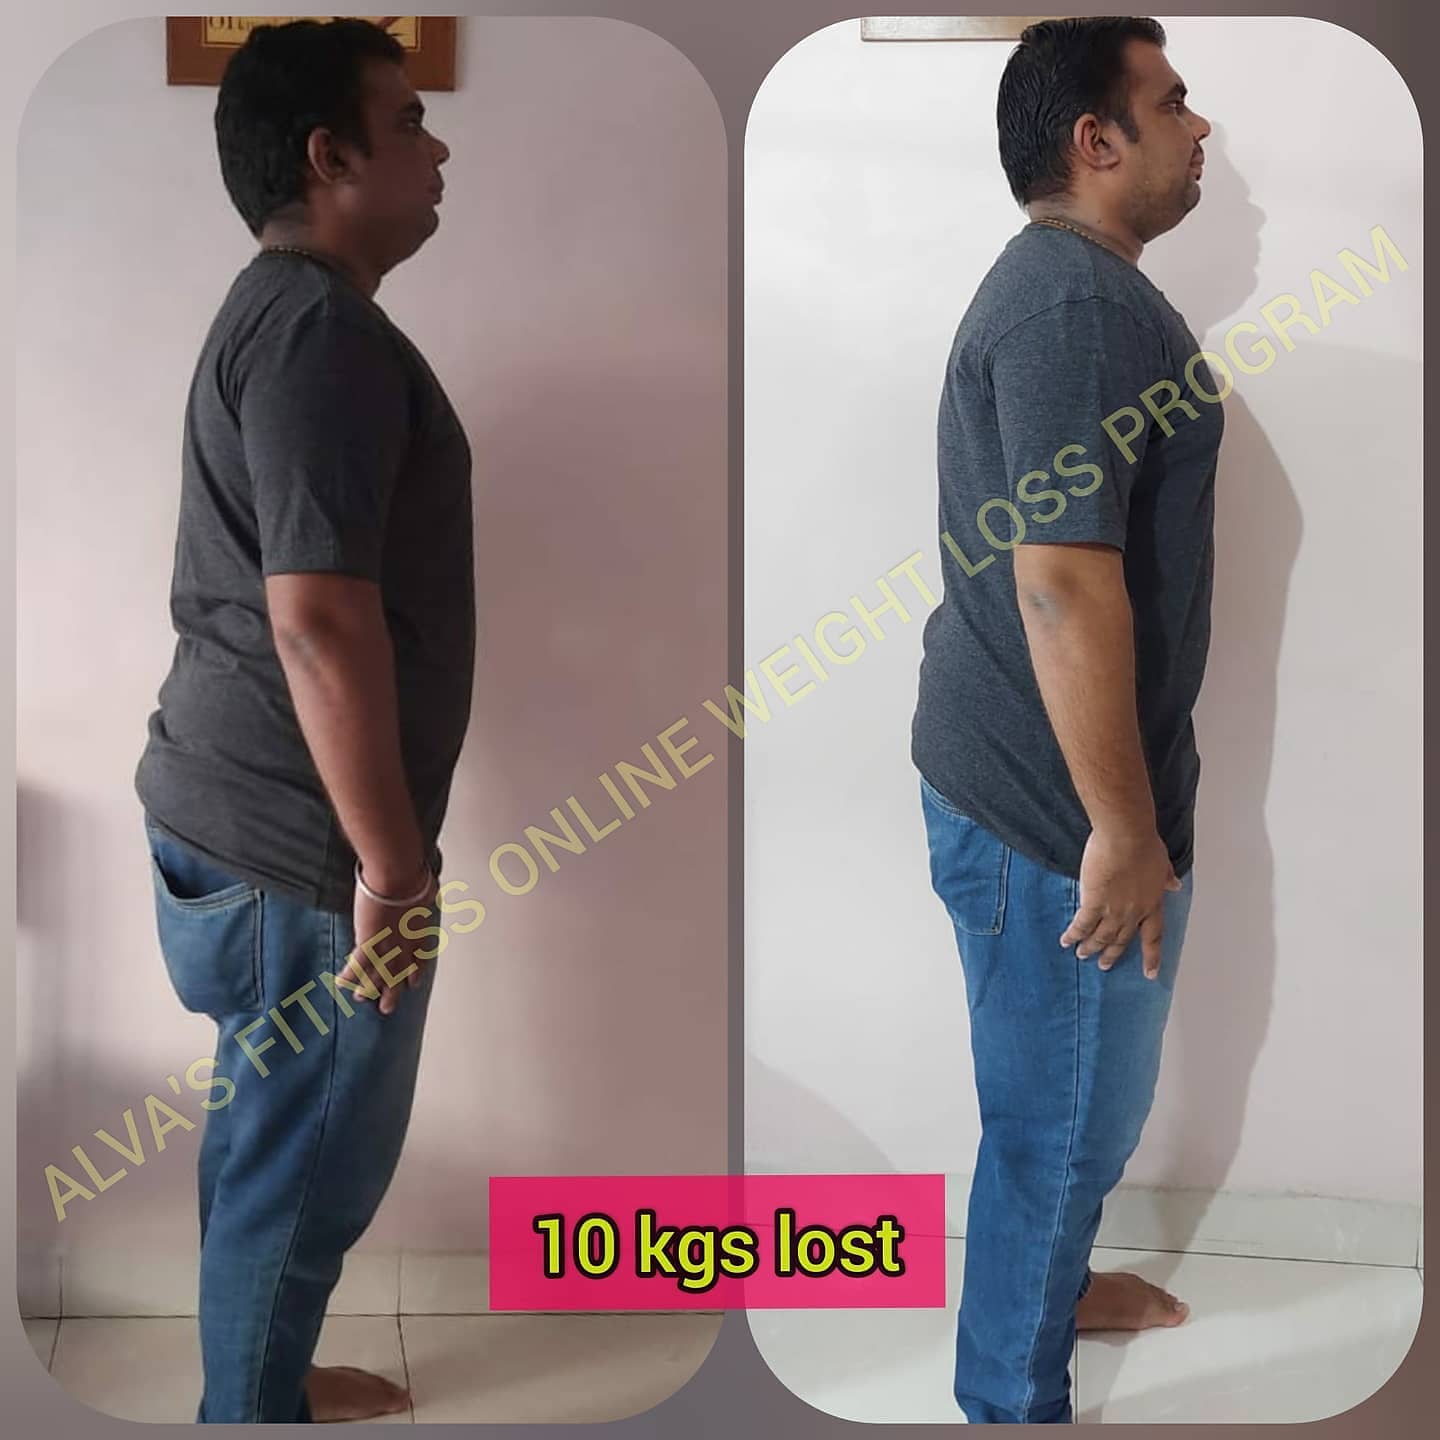 HEALTHY WEIGHT LOSS IS WHAT ALVA’S FITNESS DOES. 10kgs lost and a long way to go…